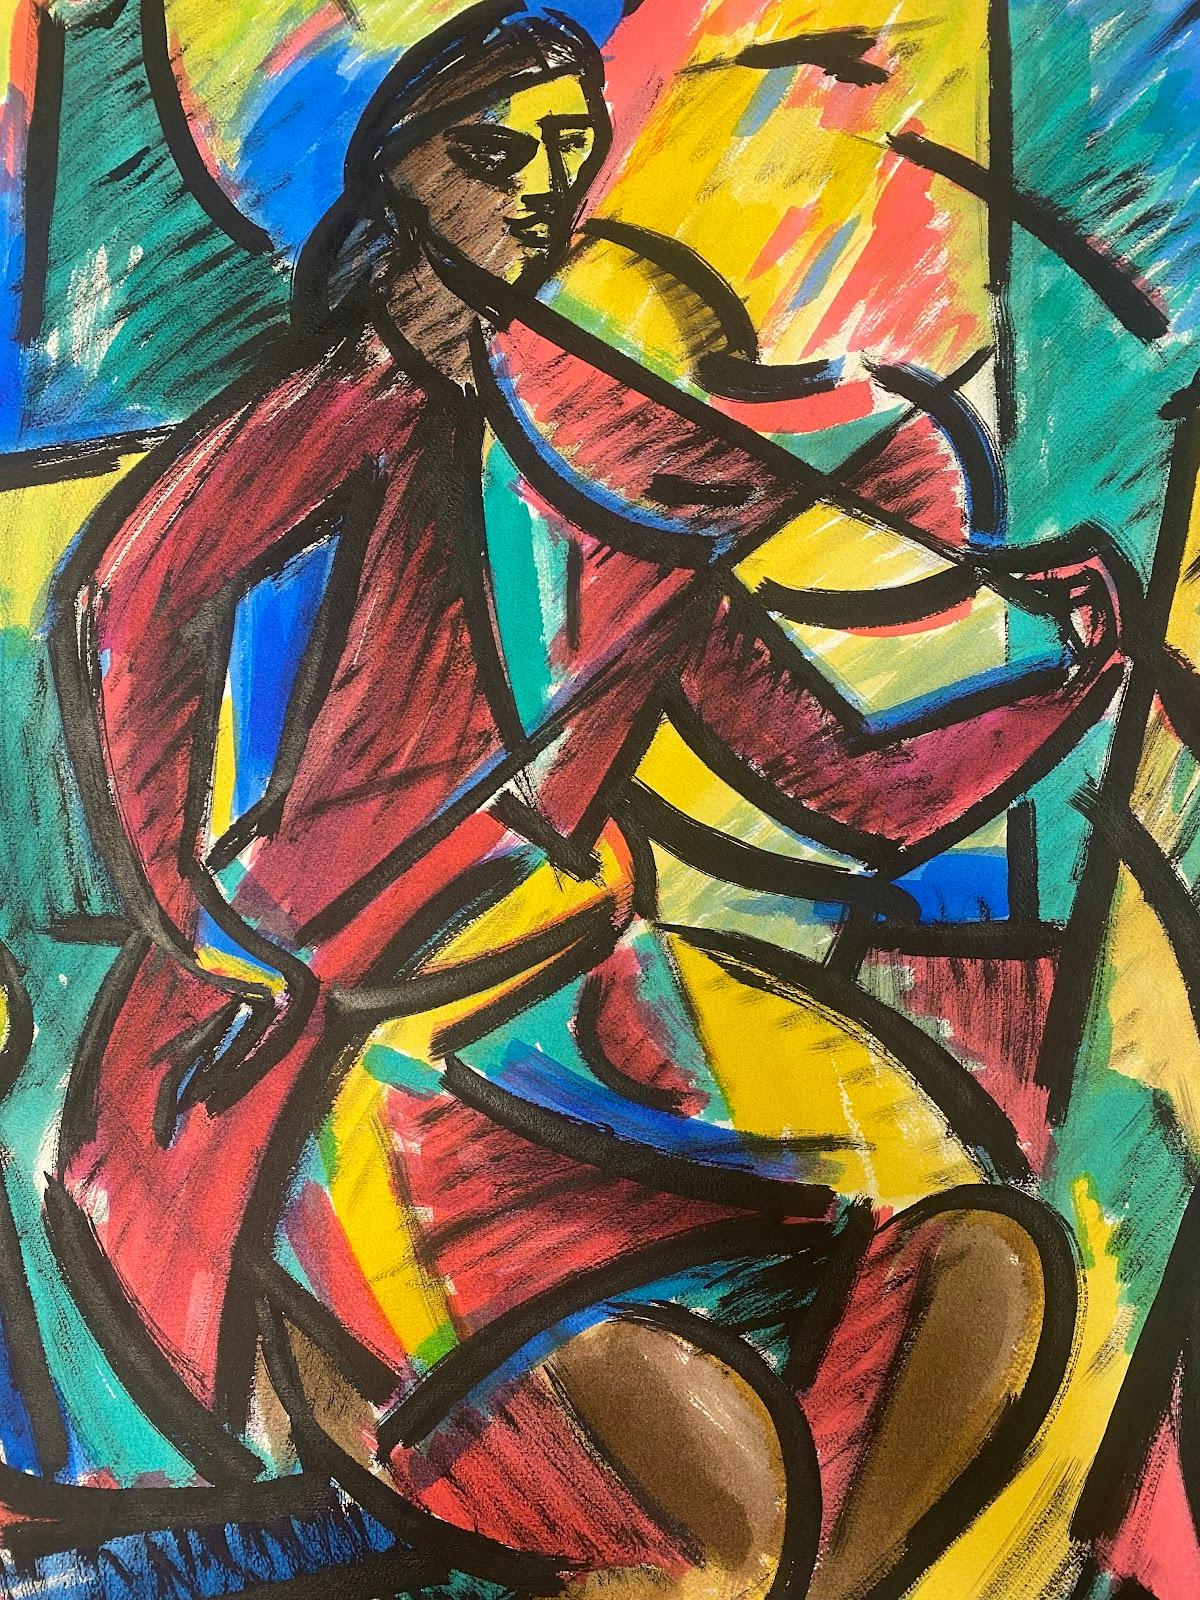 Paul-Louis Bolot (French 1918-2003) Figurative Art - 1960's French Modernist Cubist Painting Gentleman In Red With Violin